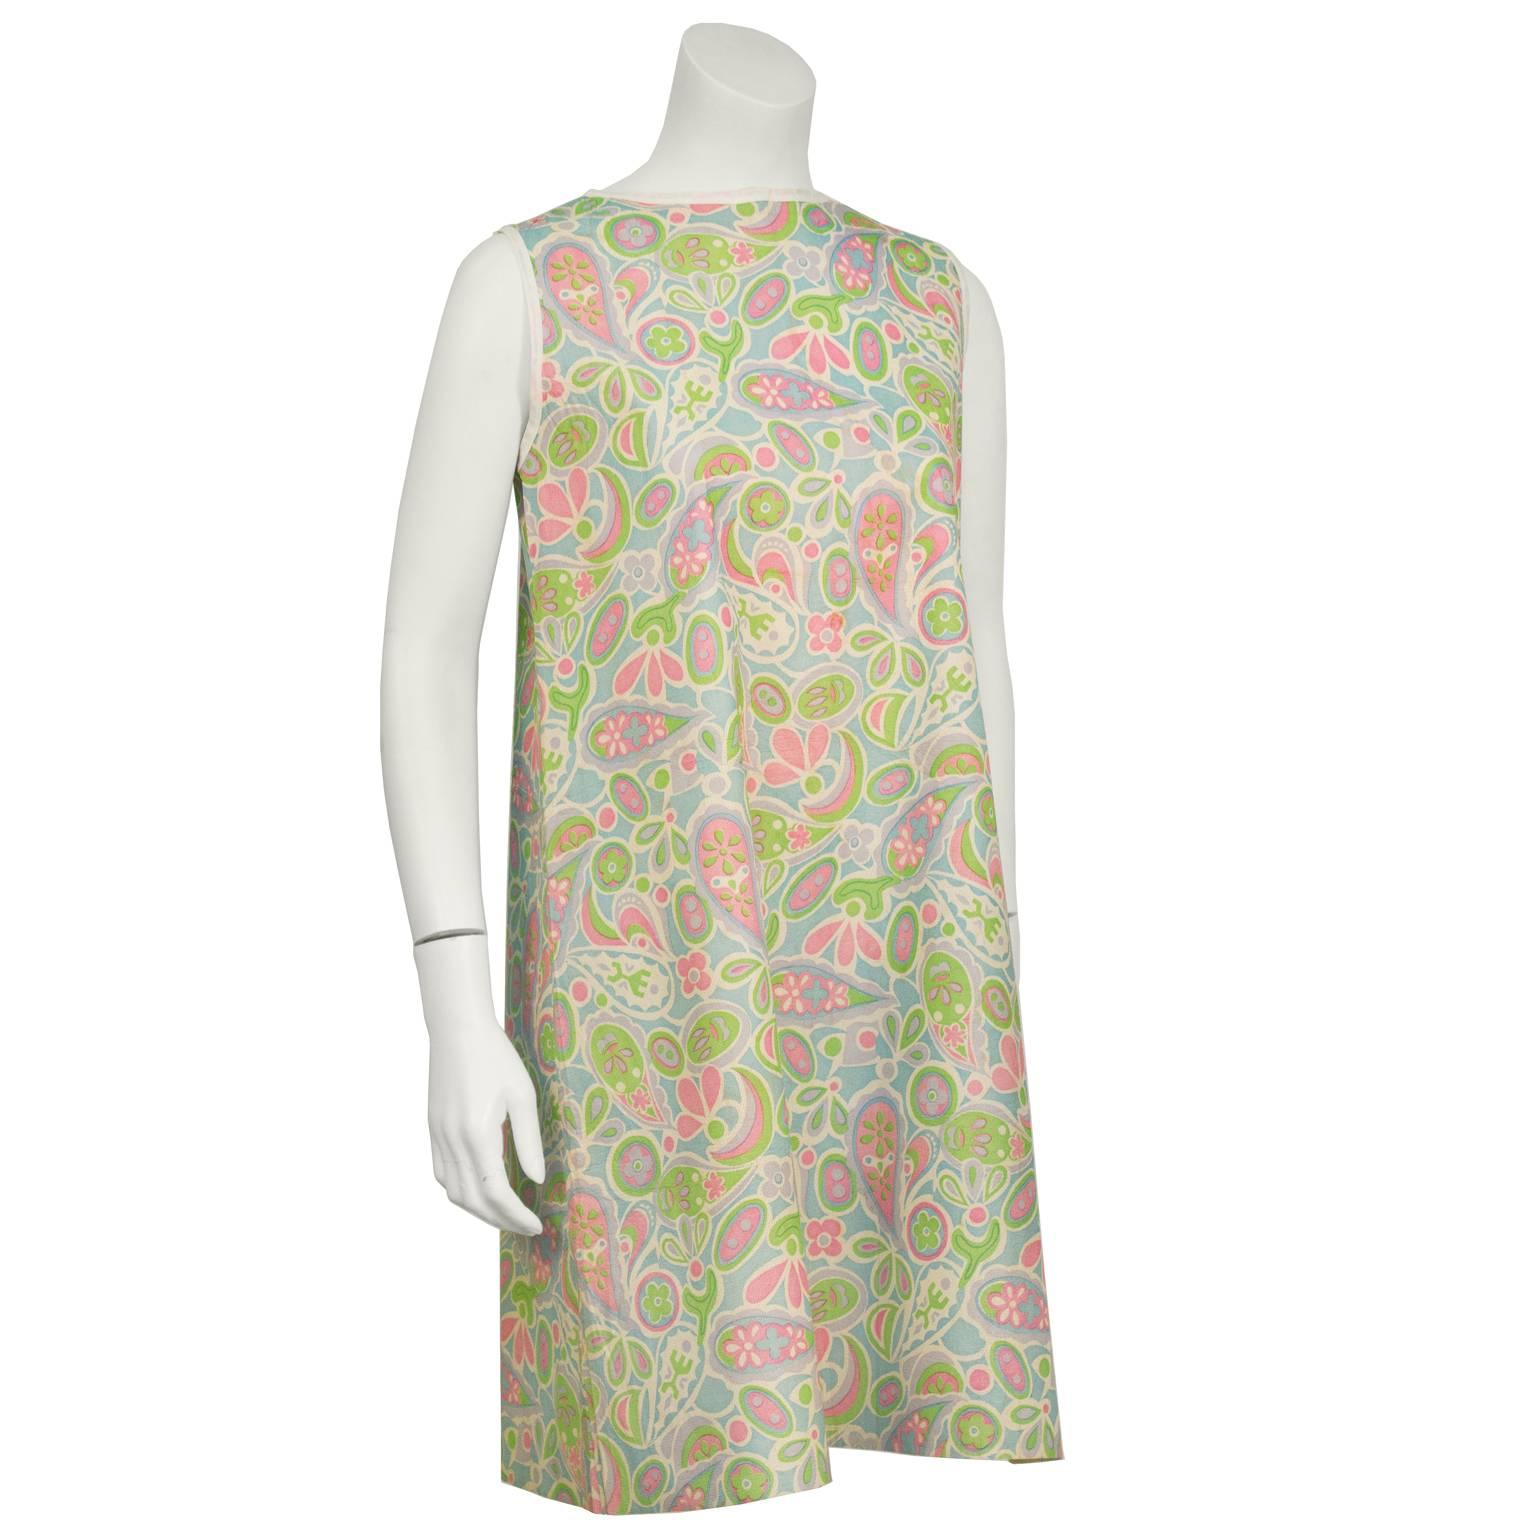 1960's iconic mod paper dress. Allover pastel mod paisley print. Sleeveless with an A-line cut. Cotton fabric banding at arms and neckline. Slight fade throughout. In very good vintage condition. A real collectors item. Fits like a US size 4-6.
